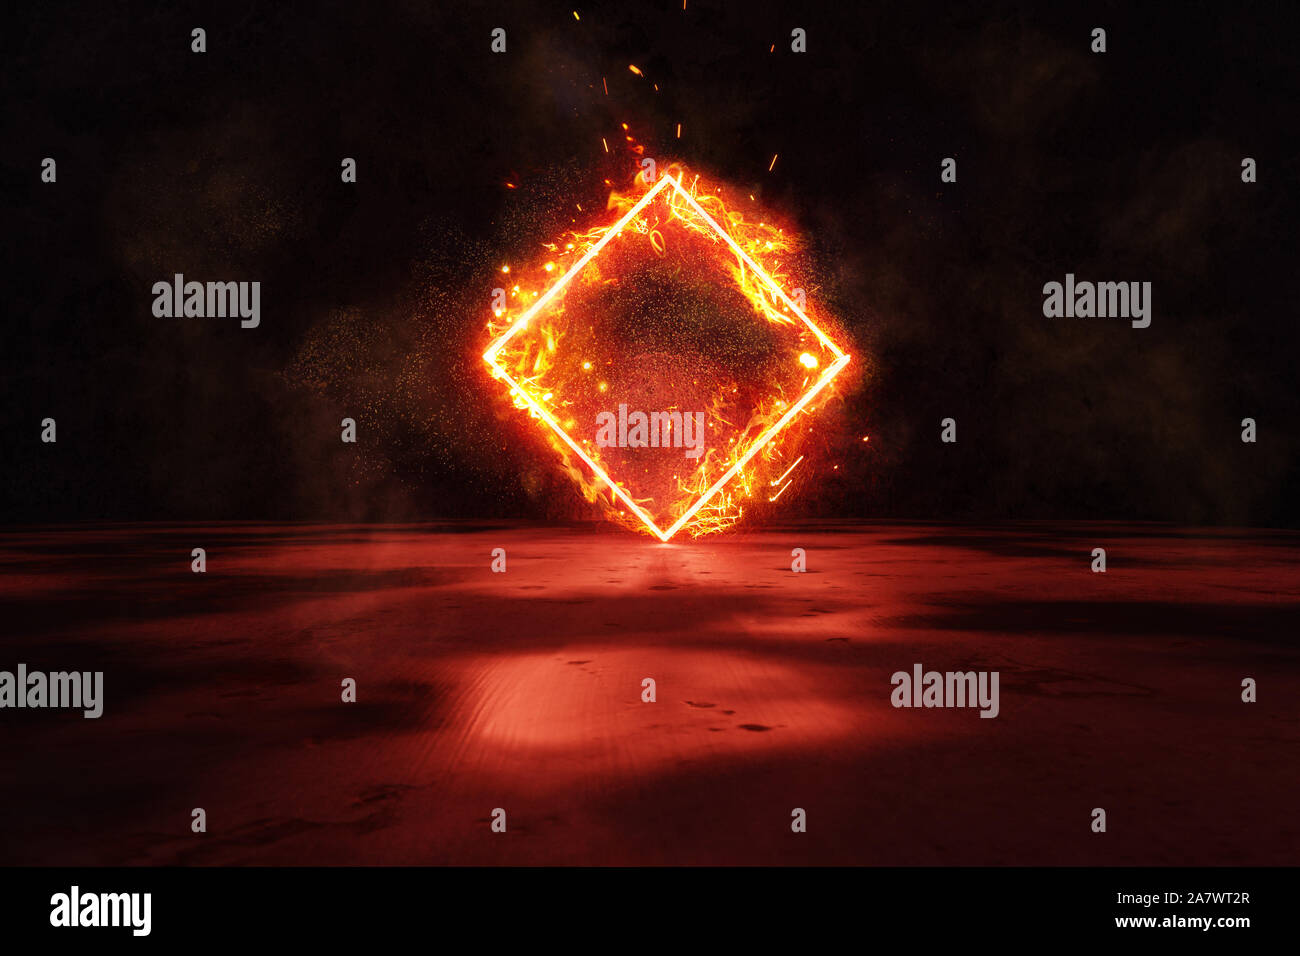 3d rendering of red lighten rotated square shape in fire against grunge wall background Stock Photo